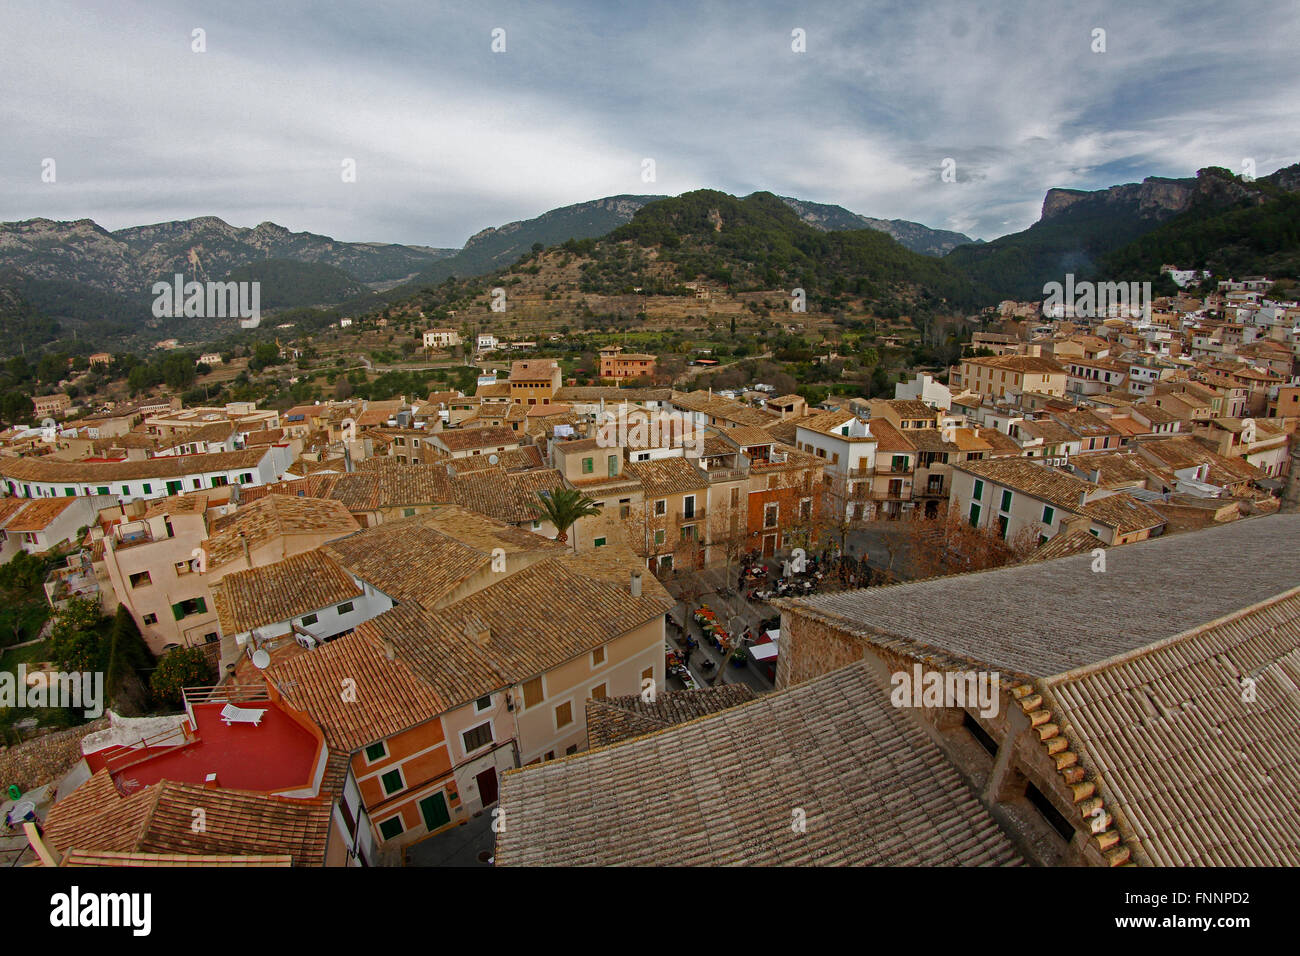 Overview of Bunyola, a small village in the Sierra de Tramuntana in Mallorca in the Balearic Islands. Stock Photo